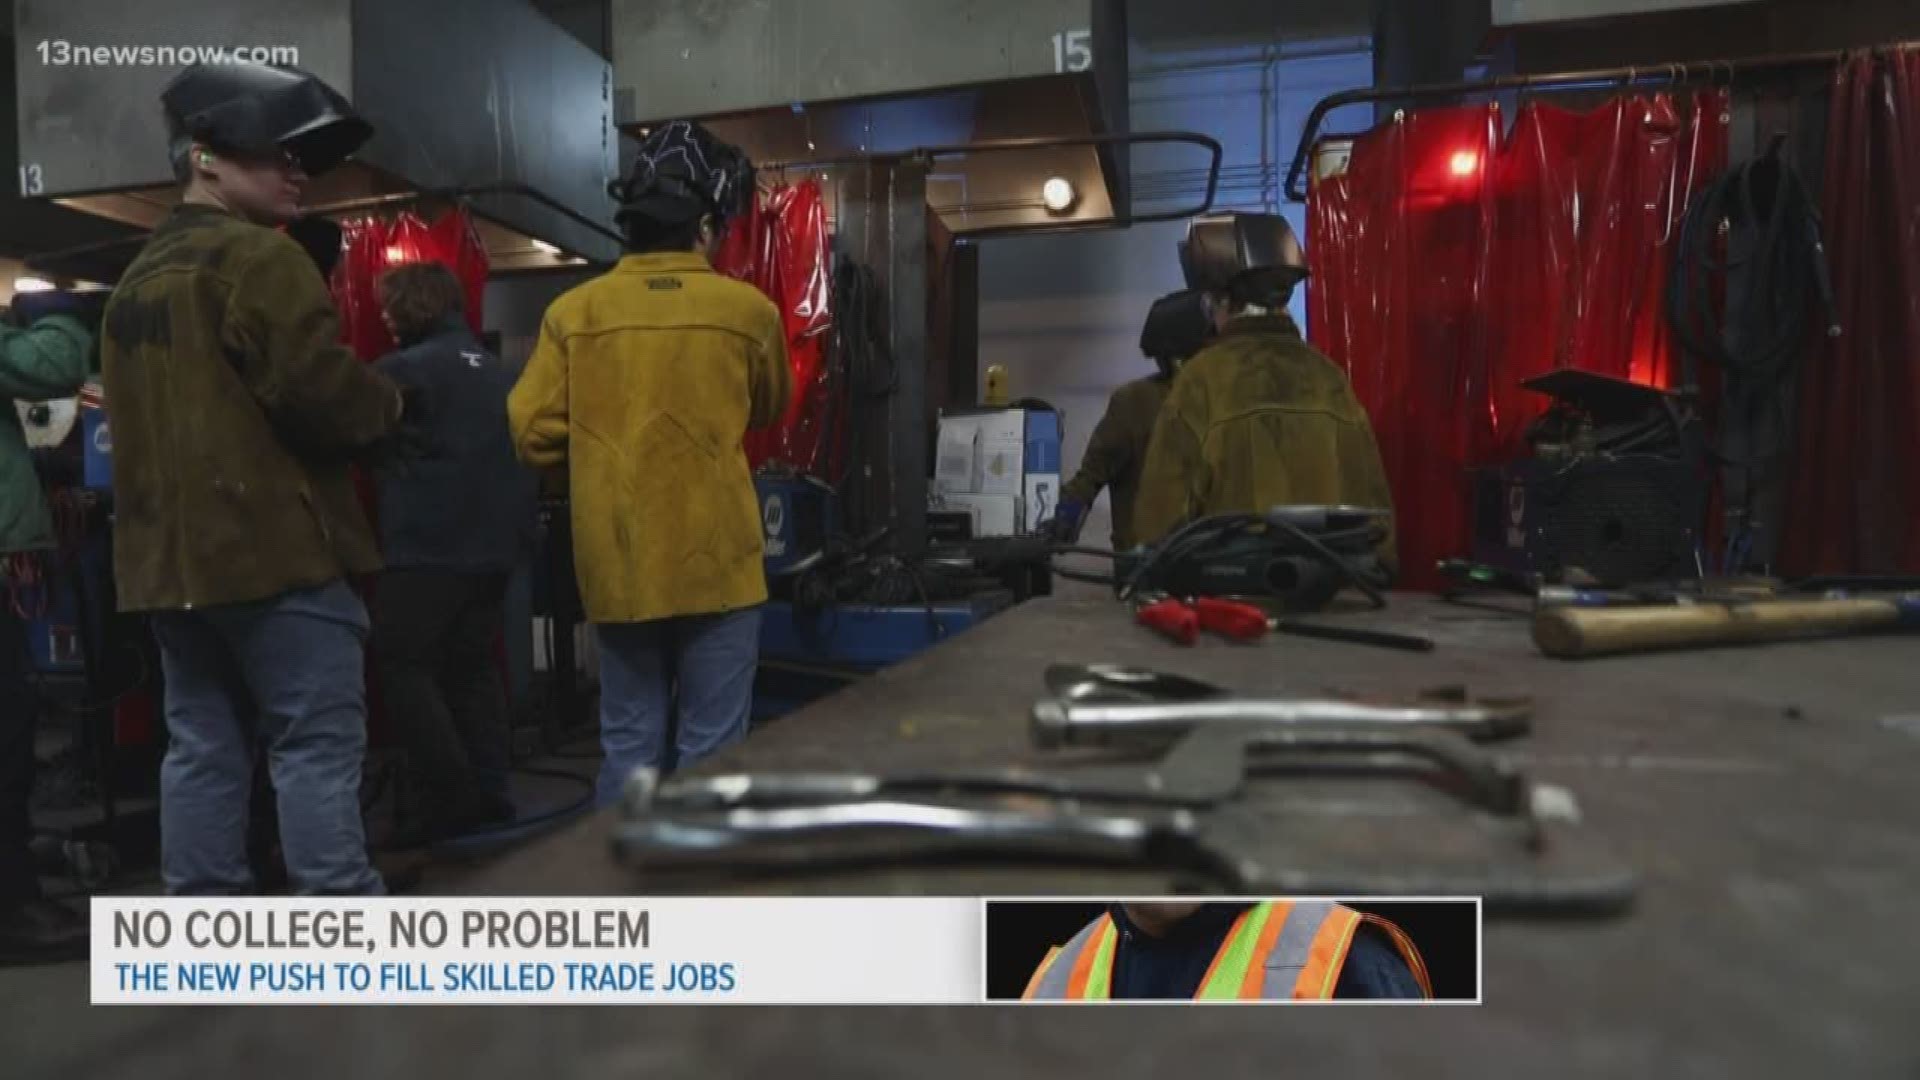 13News Now Evan Watson looks at the growing demand for skilled trade labor as opposed to seeking college education due to rising costs and student loan debt.